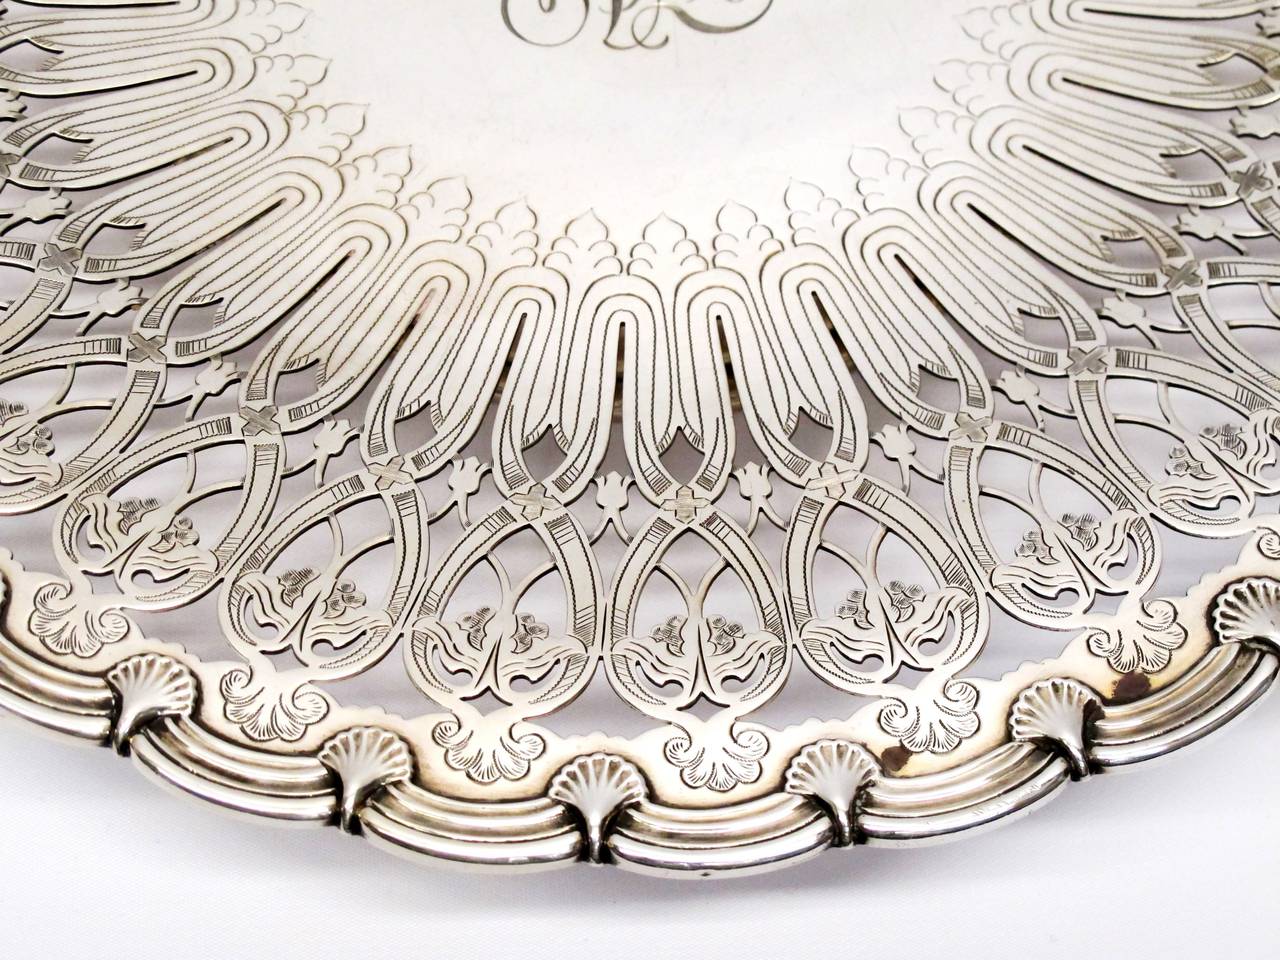 Women's or Men's Tiffany & Co. Pierced and Engraved Footed Sterling Silver Tray For Sale